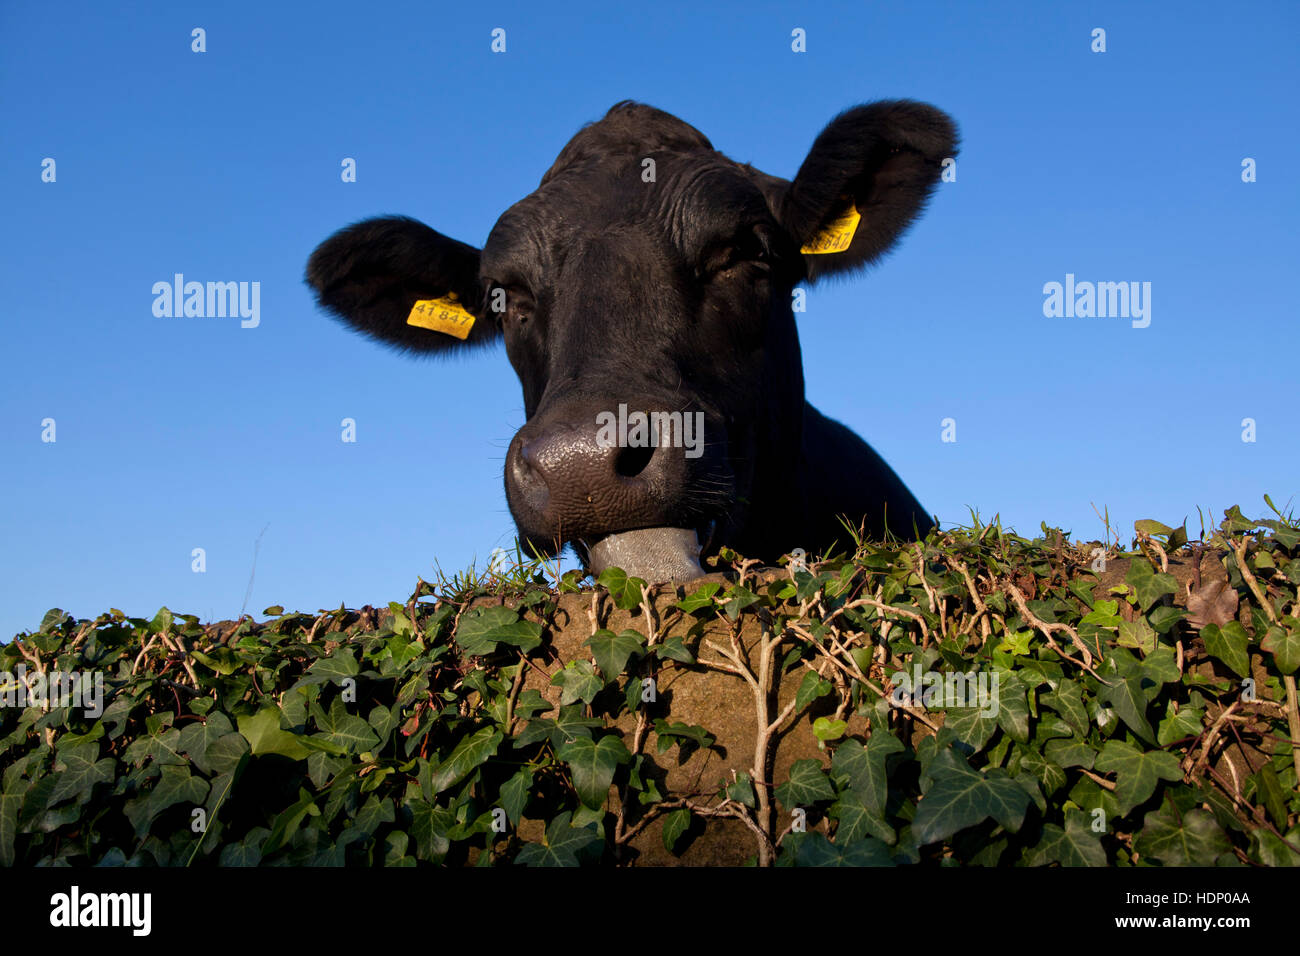 Europe, Germany, North Rhine-Westphalia, Herdecke, cow is eating the ivy leaves on a wall. Stock Photo